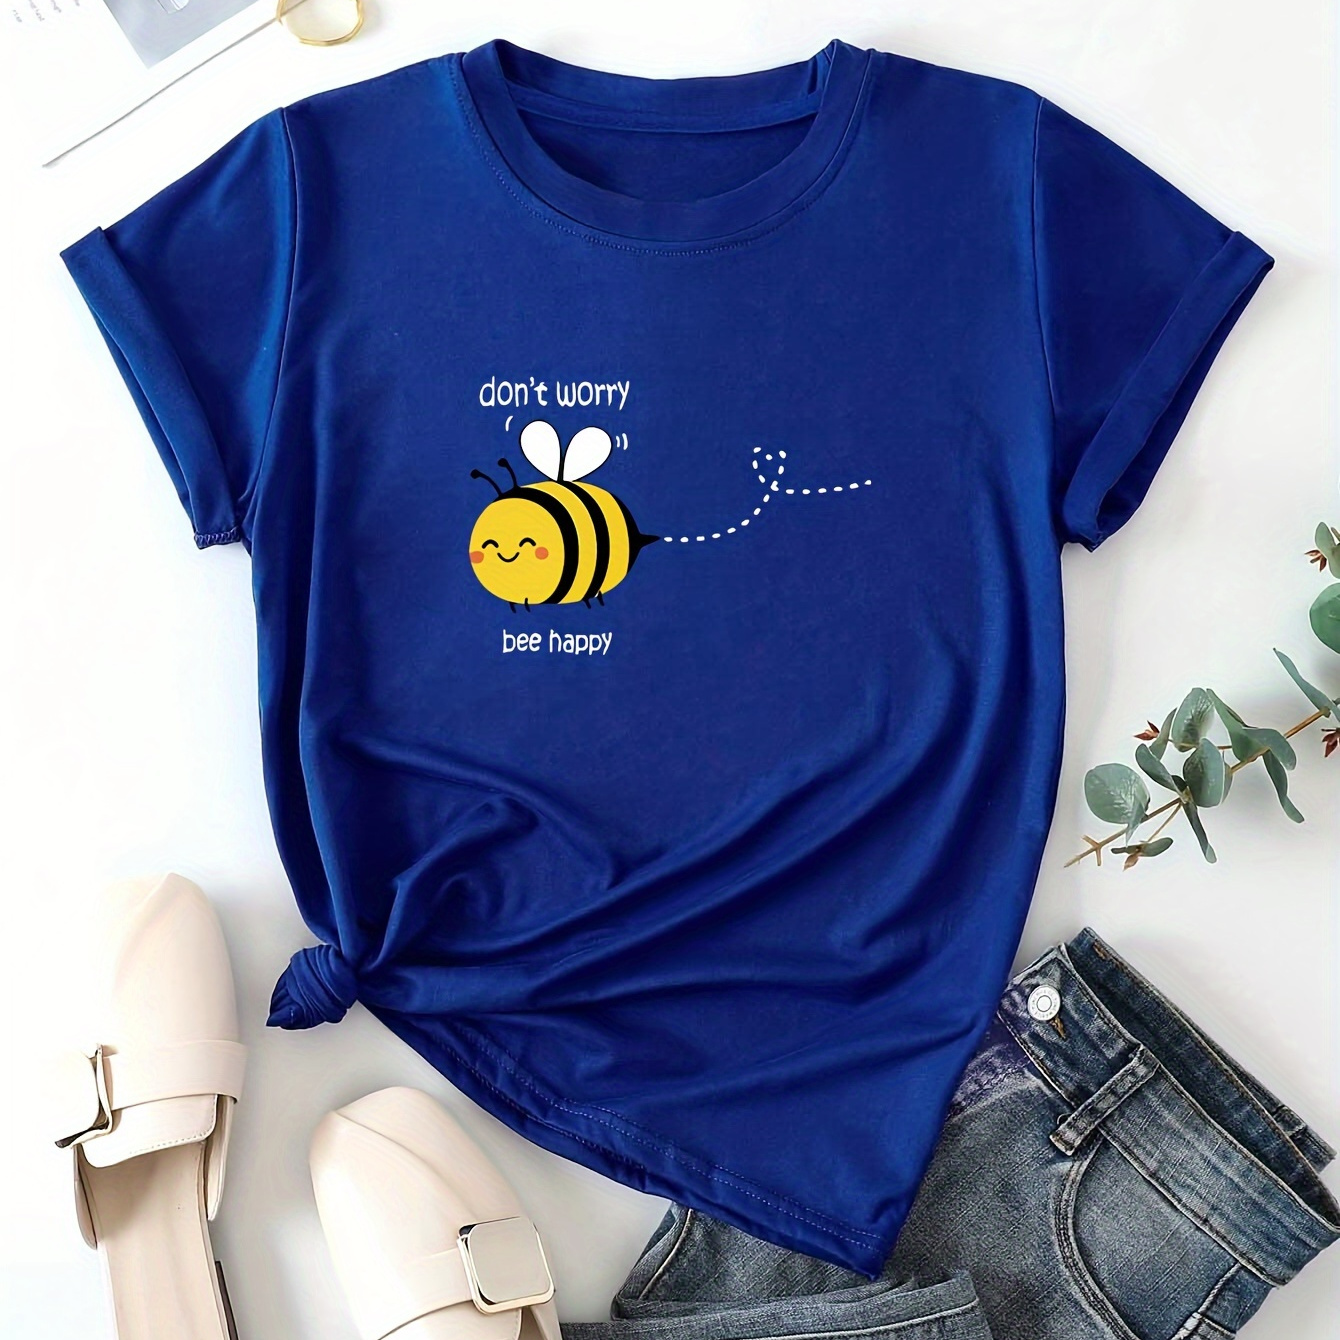 

Cute Bee & Letter Print Casual T-shirt, Round Neck Short Sleeves Pullover Sports Tee, Women's Tops